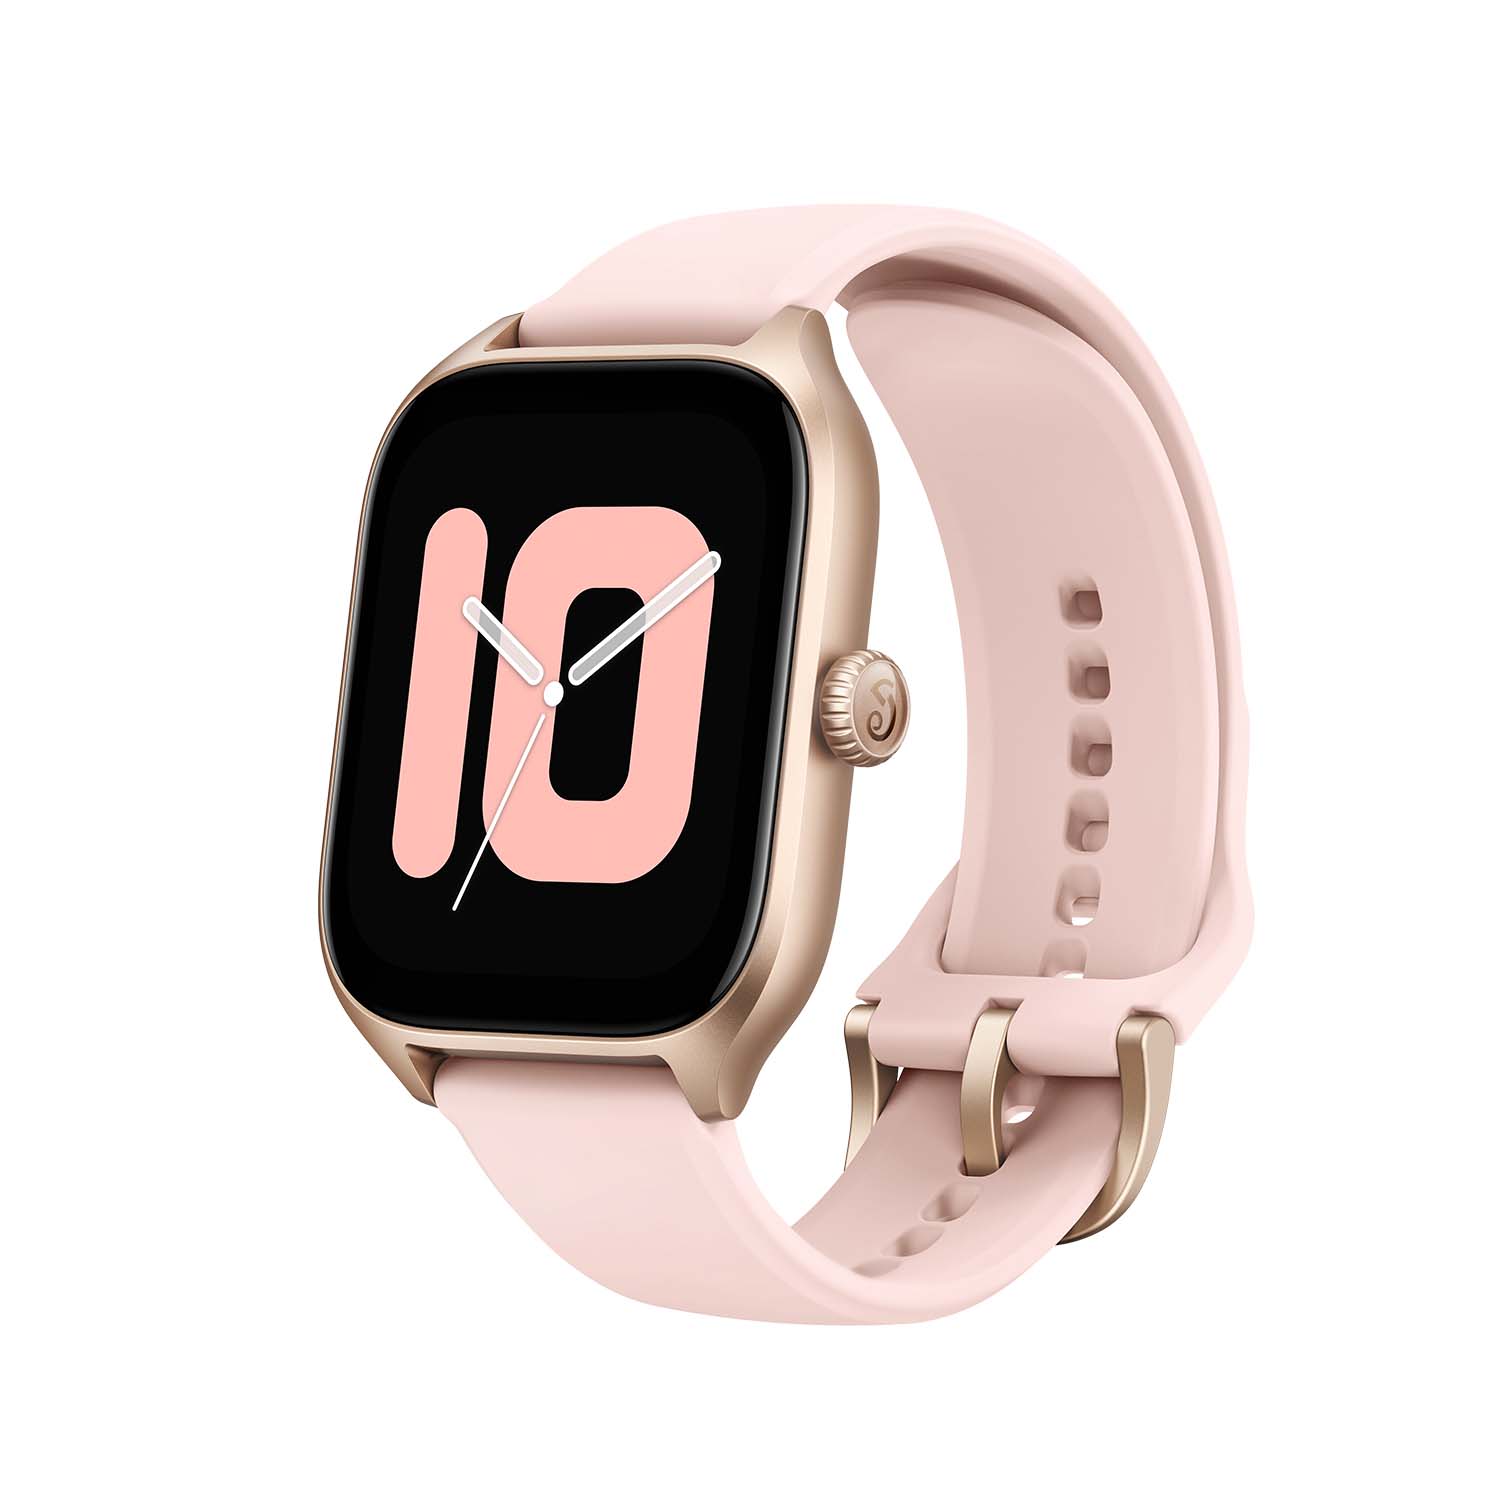 Buy Branded Smartwatches for Women Online